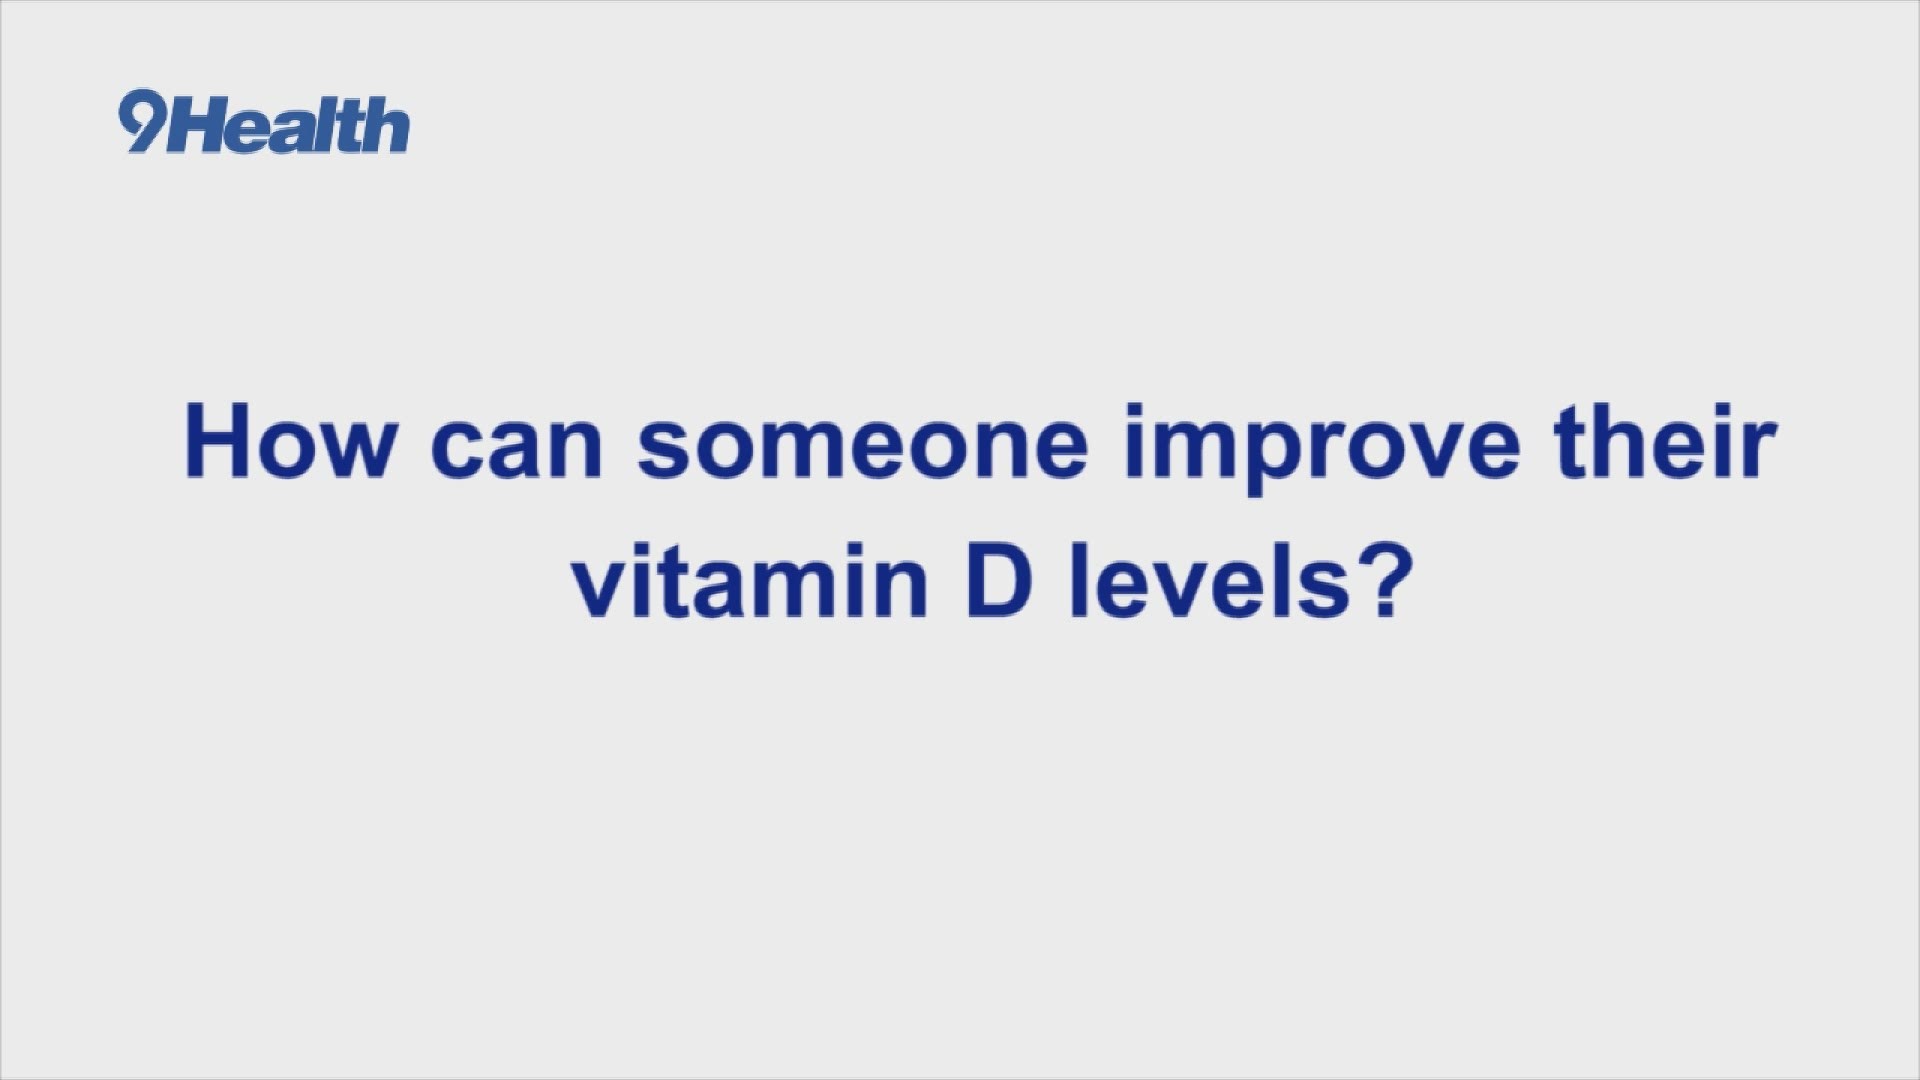 Low vitamin D levels have been associated with an increased risk of heart disease. 9Health Expert Dr. Payal Kohli explains.